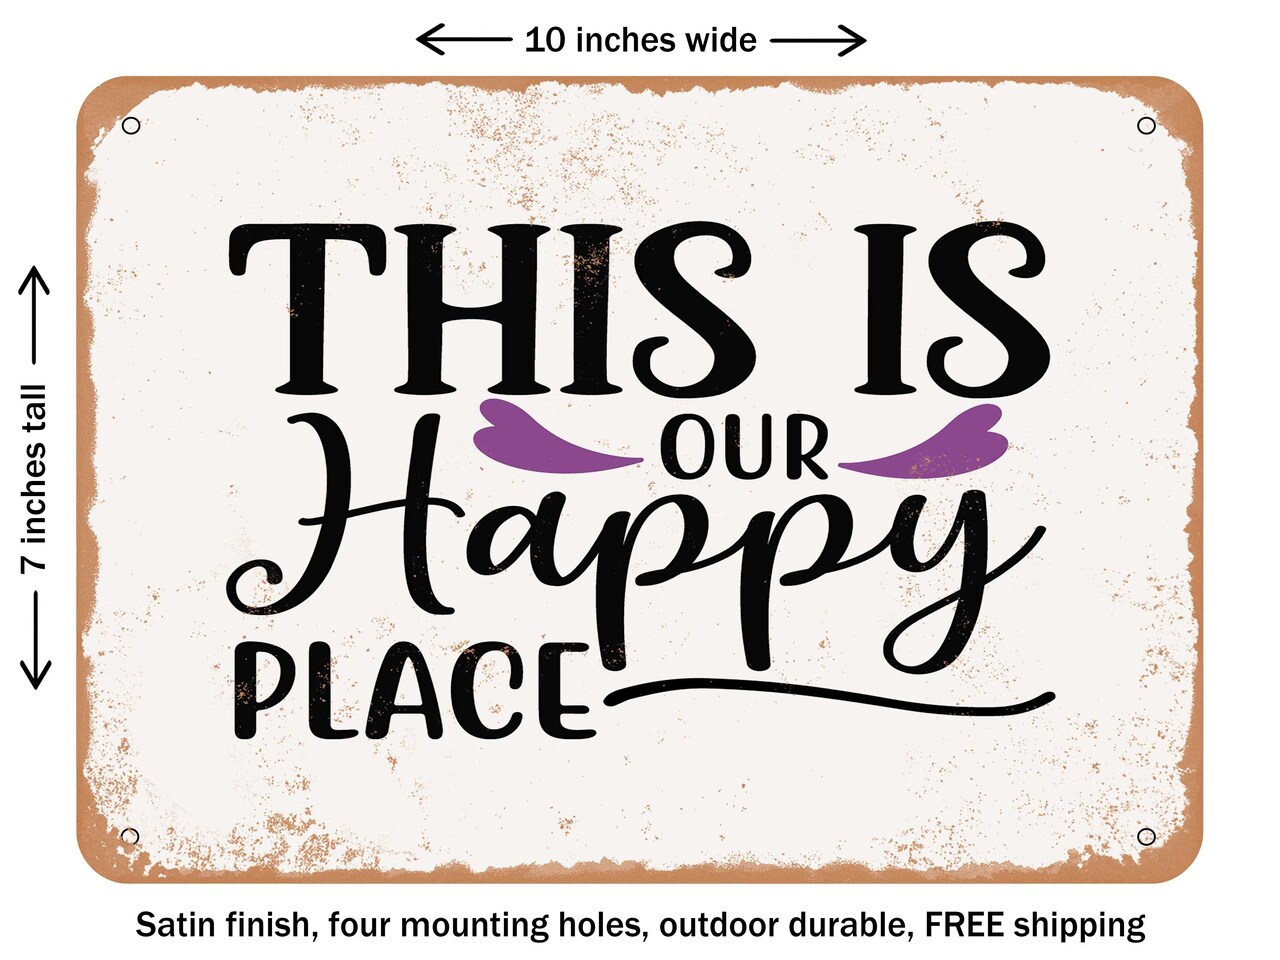 DECORATIVE METAL SIGN - This is Our Happy Place - 7 - Vintage Rusty Look